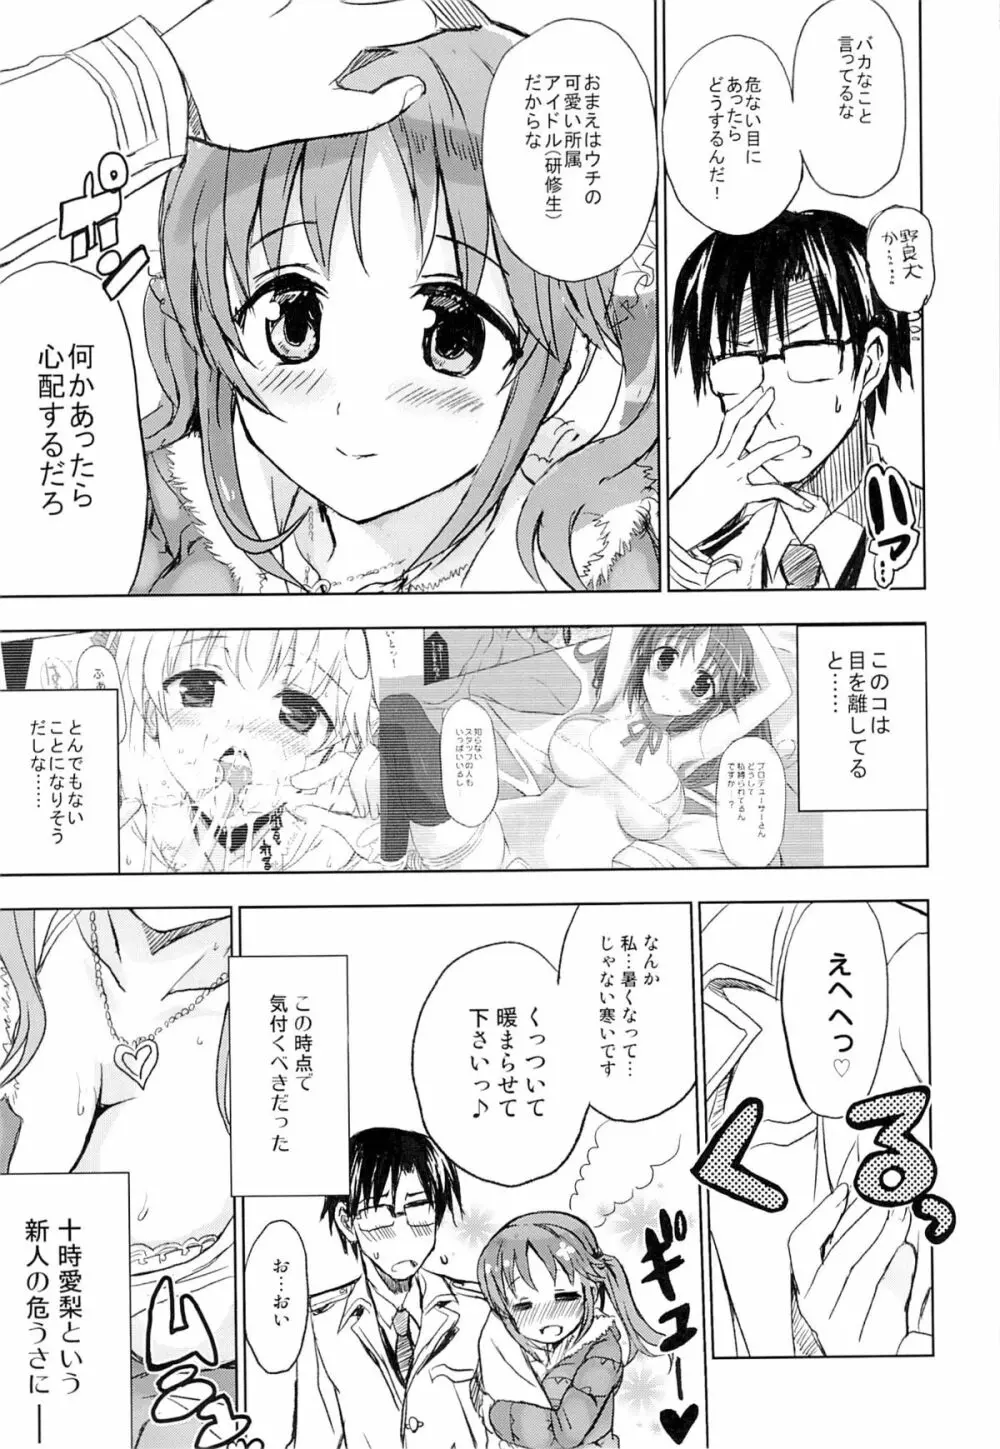 Passion Fruit Girls #十時愛梨 プリンセスバニーは眠らない。 - page8